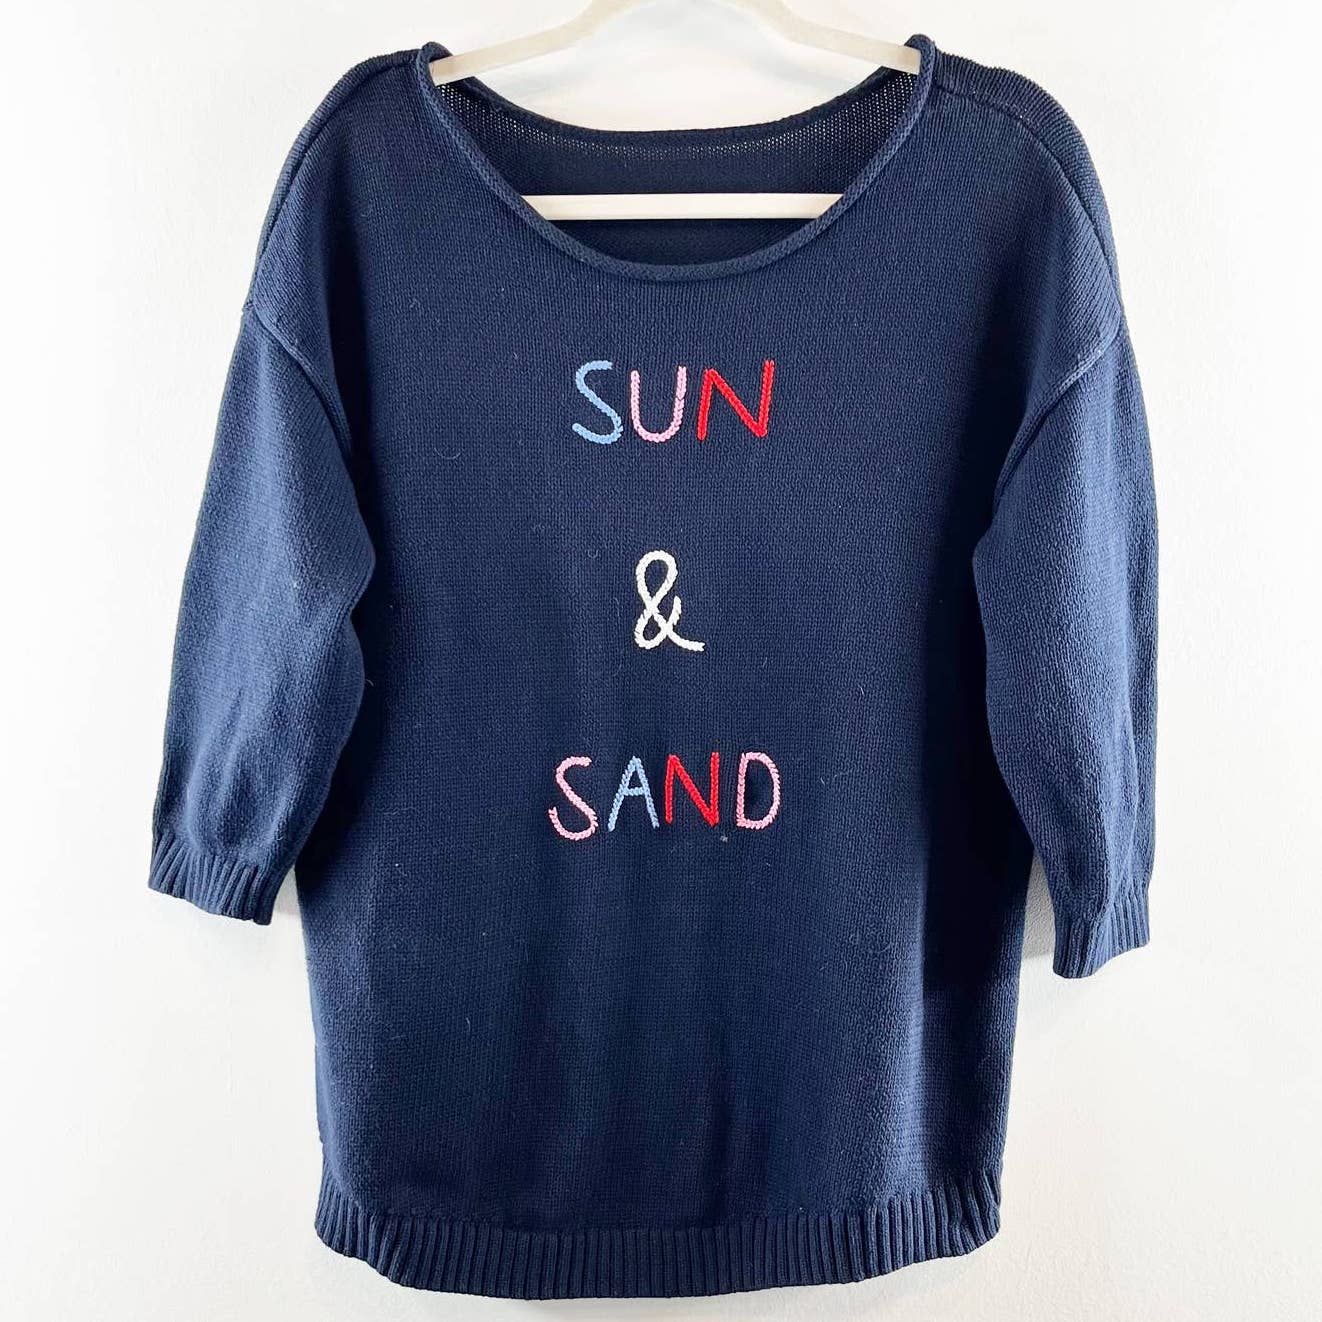 Talbots Embroidered Sun & Sand 3/4 Sleeve Roll Neck Pullover Sweater Navy Blue